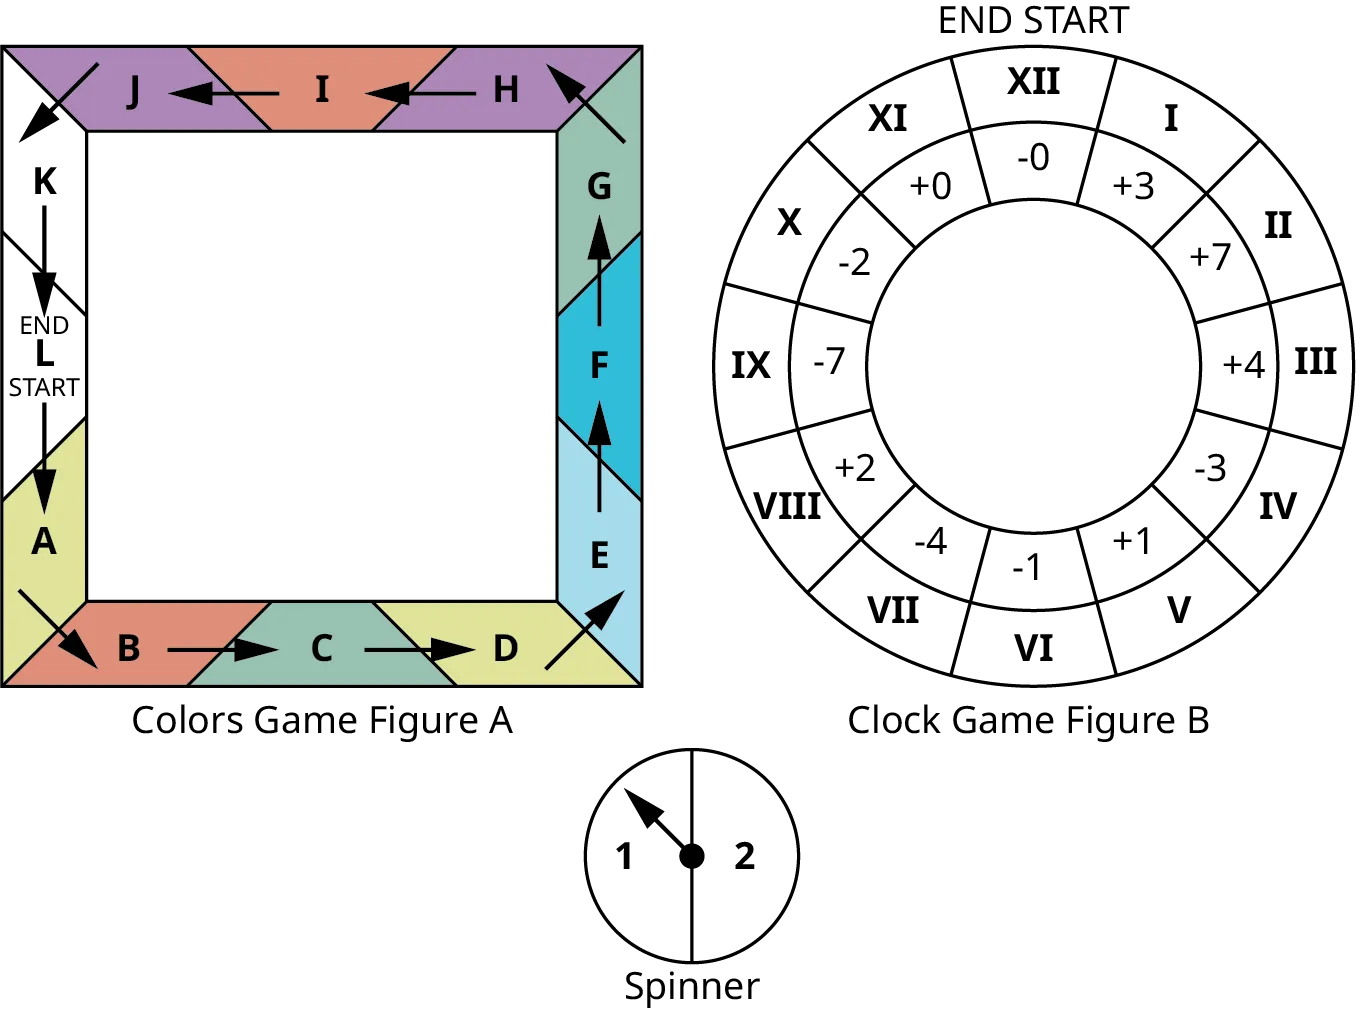 Two game boards and a spinner. The first game board is titled, Colors Game Figure A. It has 12 spaces arranged in a square. The spaces are as follows: A (yellow), B (red), C (green), D (yellow), E (blue), F (blue), G (green), H (purple), I (red), J (purple), K (white), L (white). Arrows show a path starting in space L and moving counterclockwise around the board to end in space L. The second game board is titled, Clock Game Figure B. It has 12 spaces arranged in a circle. The spaces are as follows: I (plus 3), II (plus 7), III (plus 4), IV (minus 3), V (plus 1), VI (minus 1), VII (minus 4), VIII (plus 2), IX (minus 7), X (minus 2), XI (plus 0), XII (minus 0). The space XII is indicated as the start and end space. A spinner has 2 sections labeled 1 and 2.